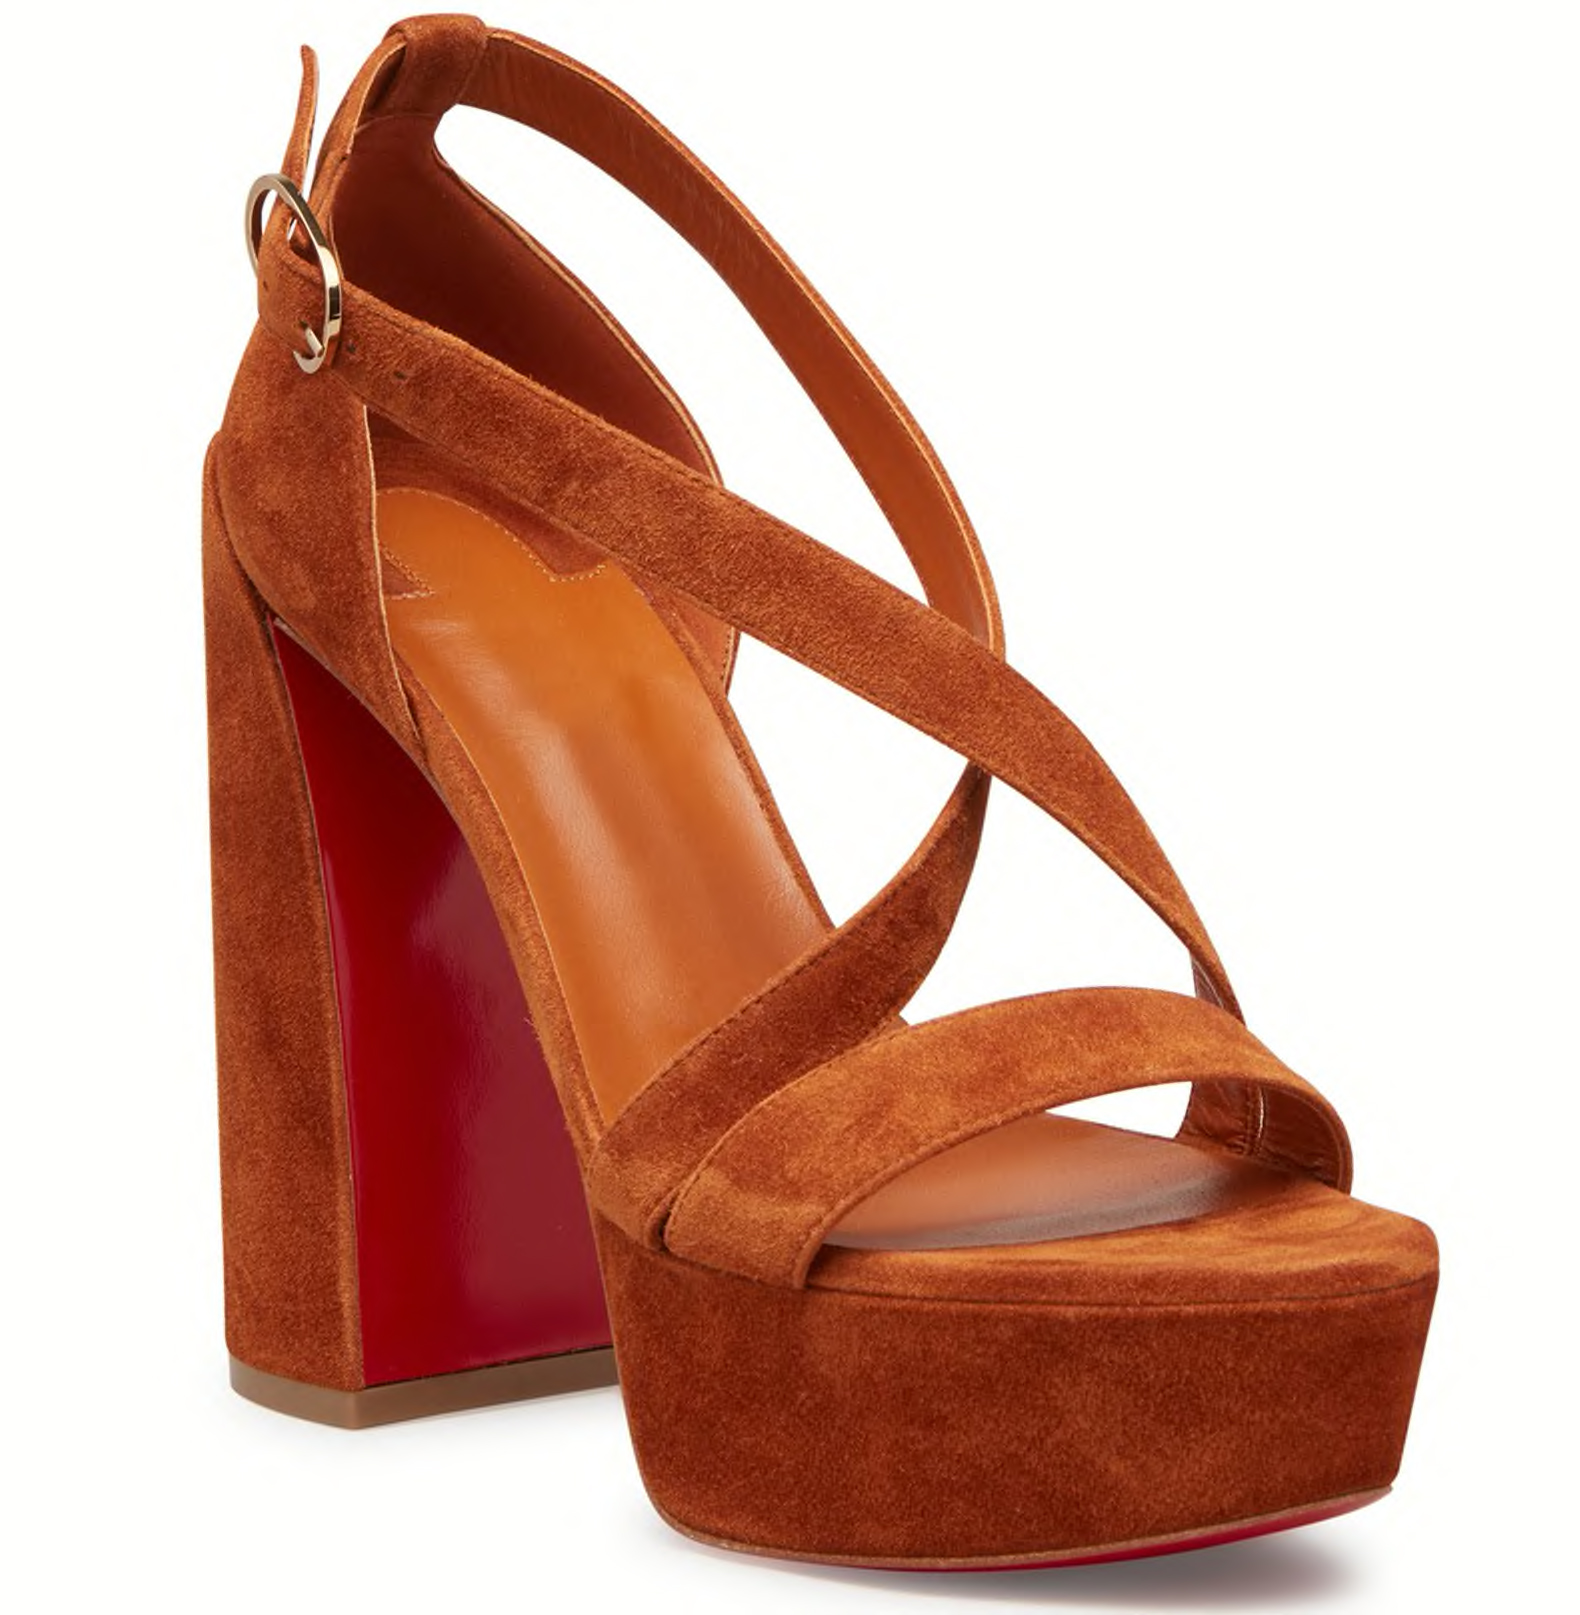 Rendered in supple brown suede, these strappy sandals are defined by a chunky block heel and platform